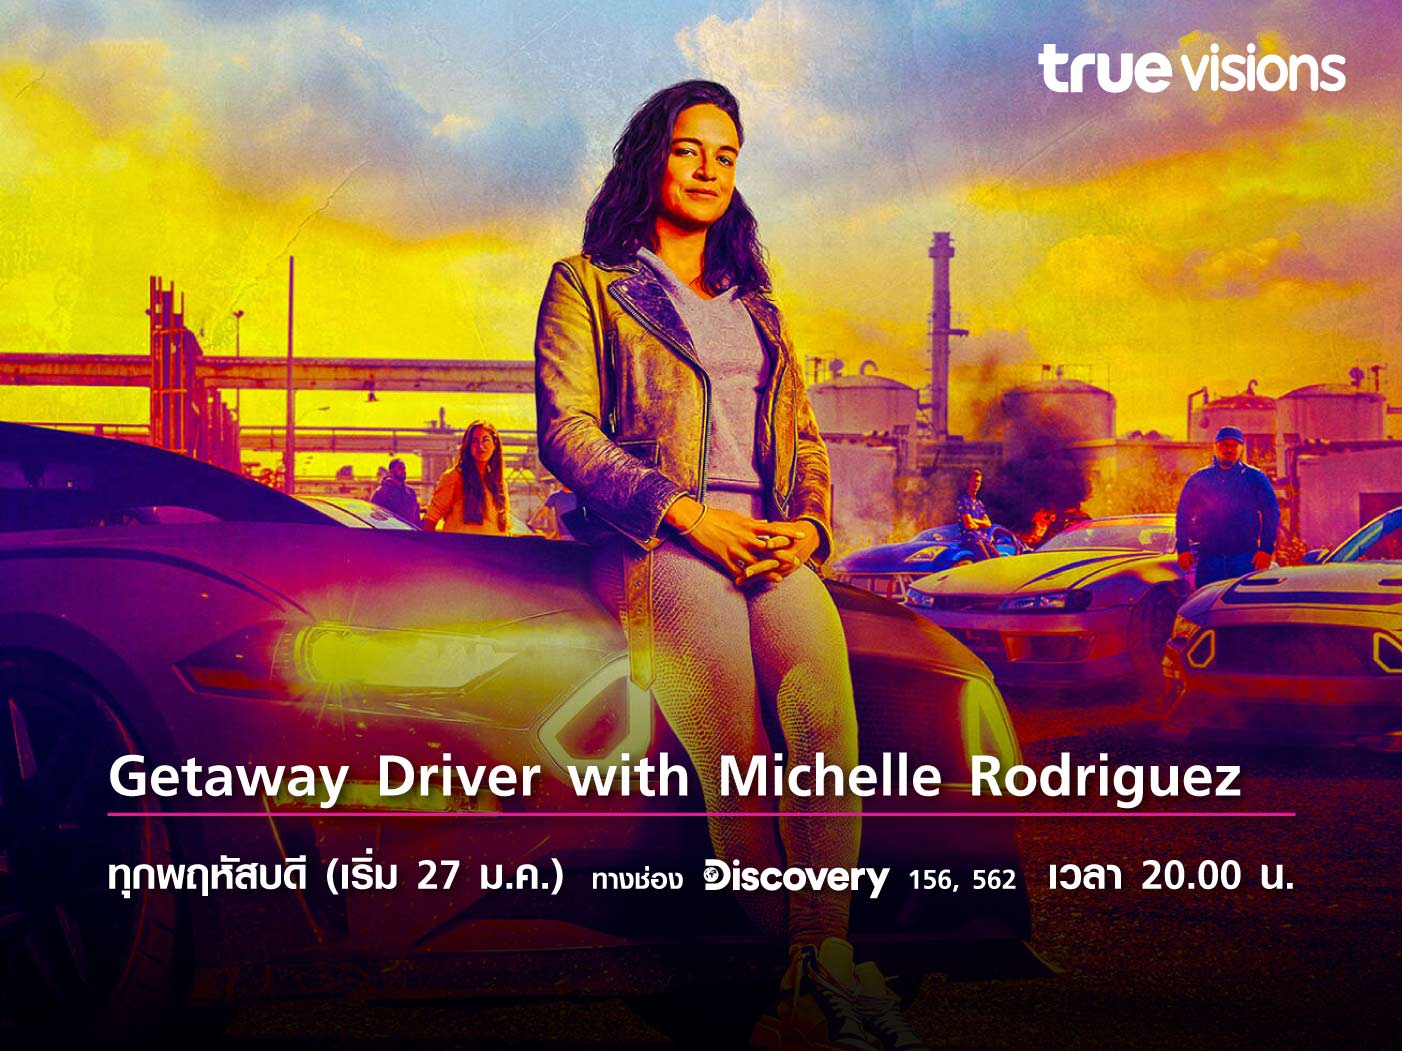 Getaway Driver with Michelle Rodriguez